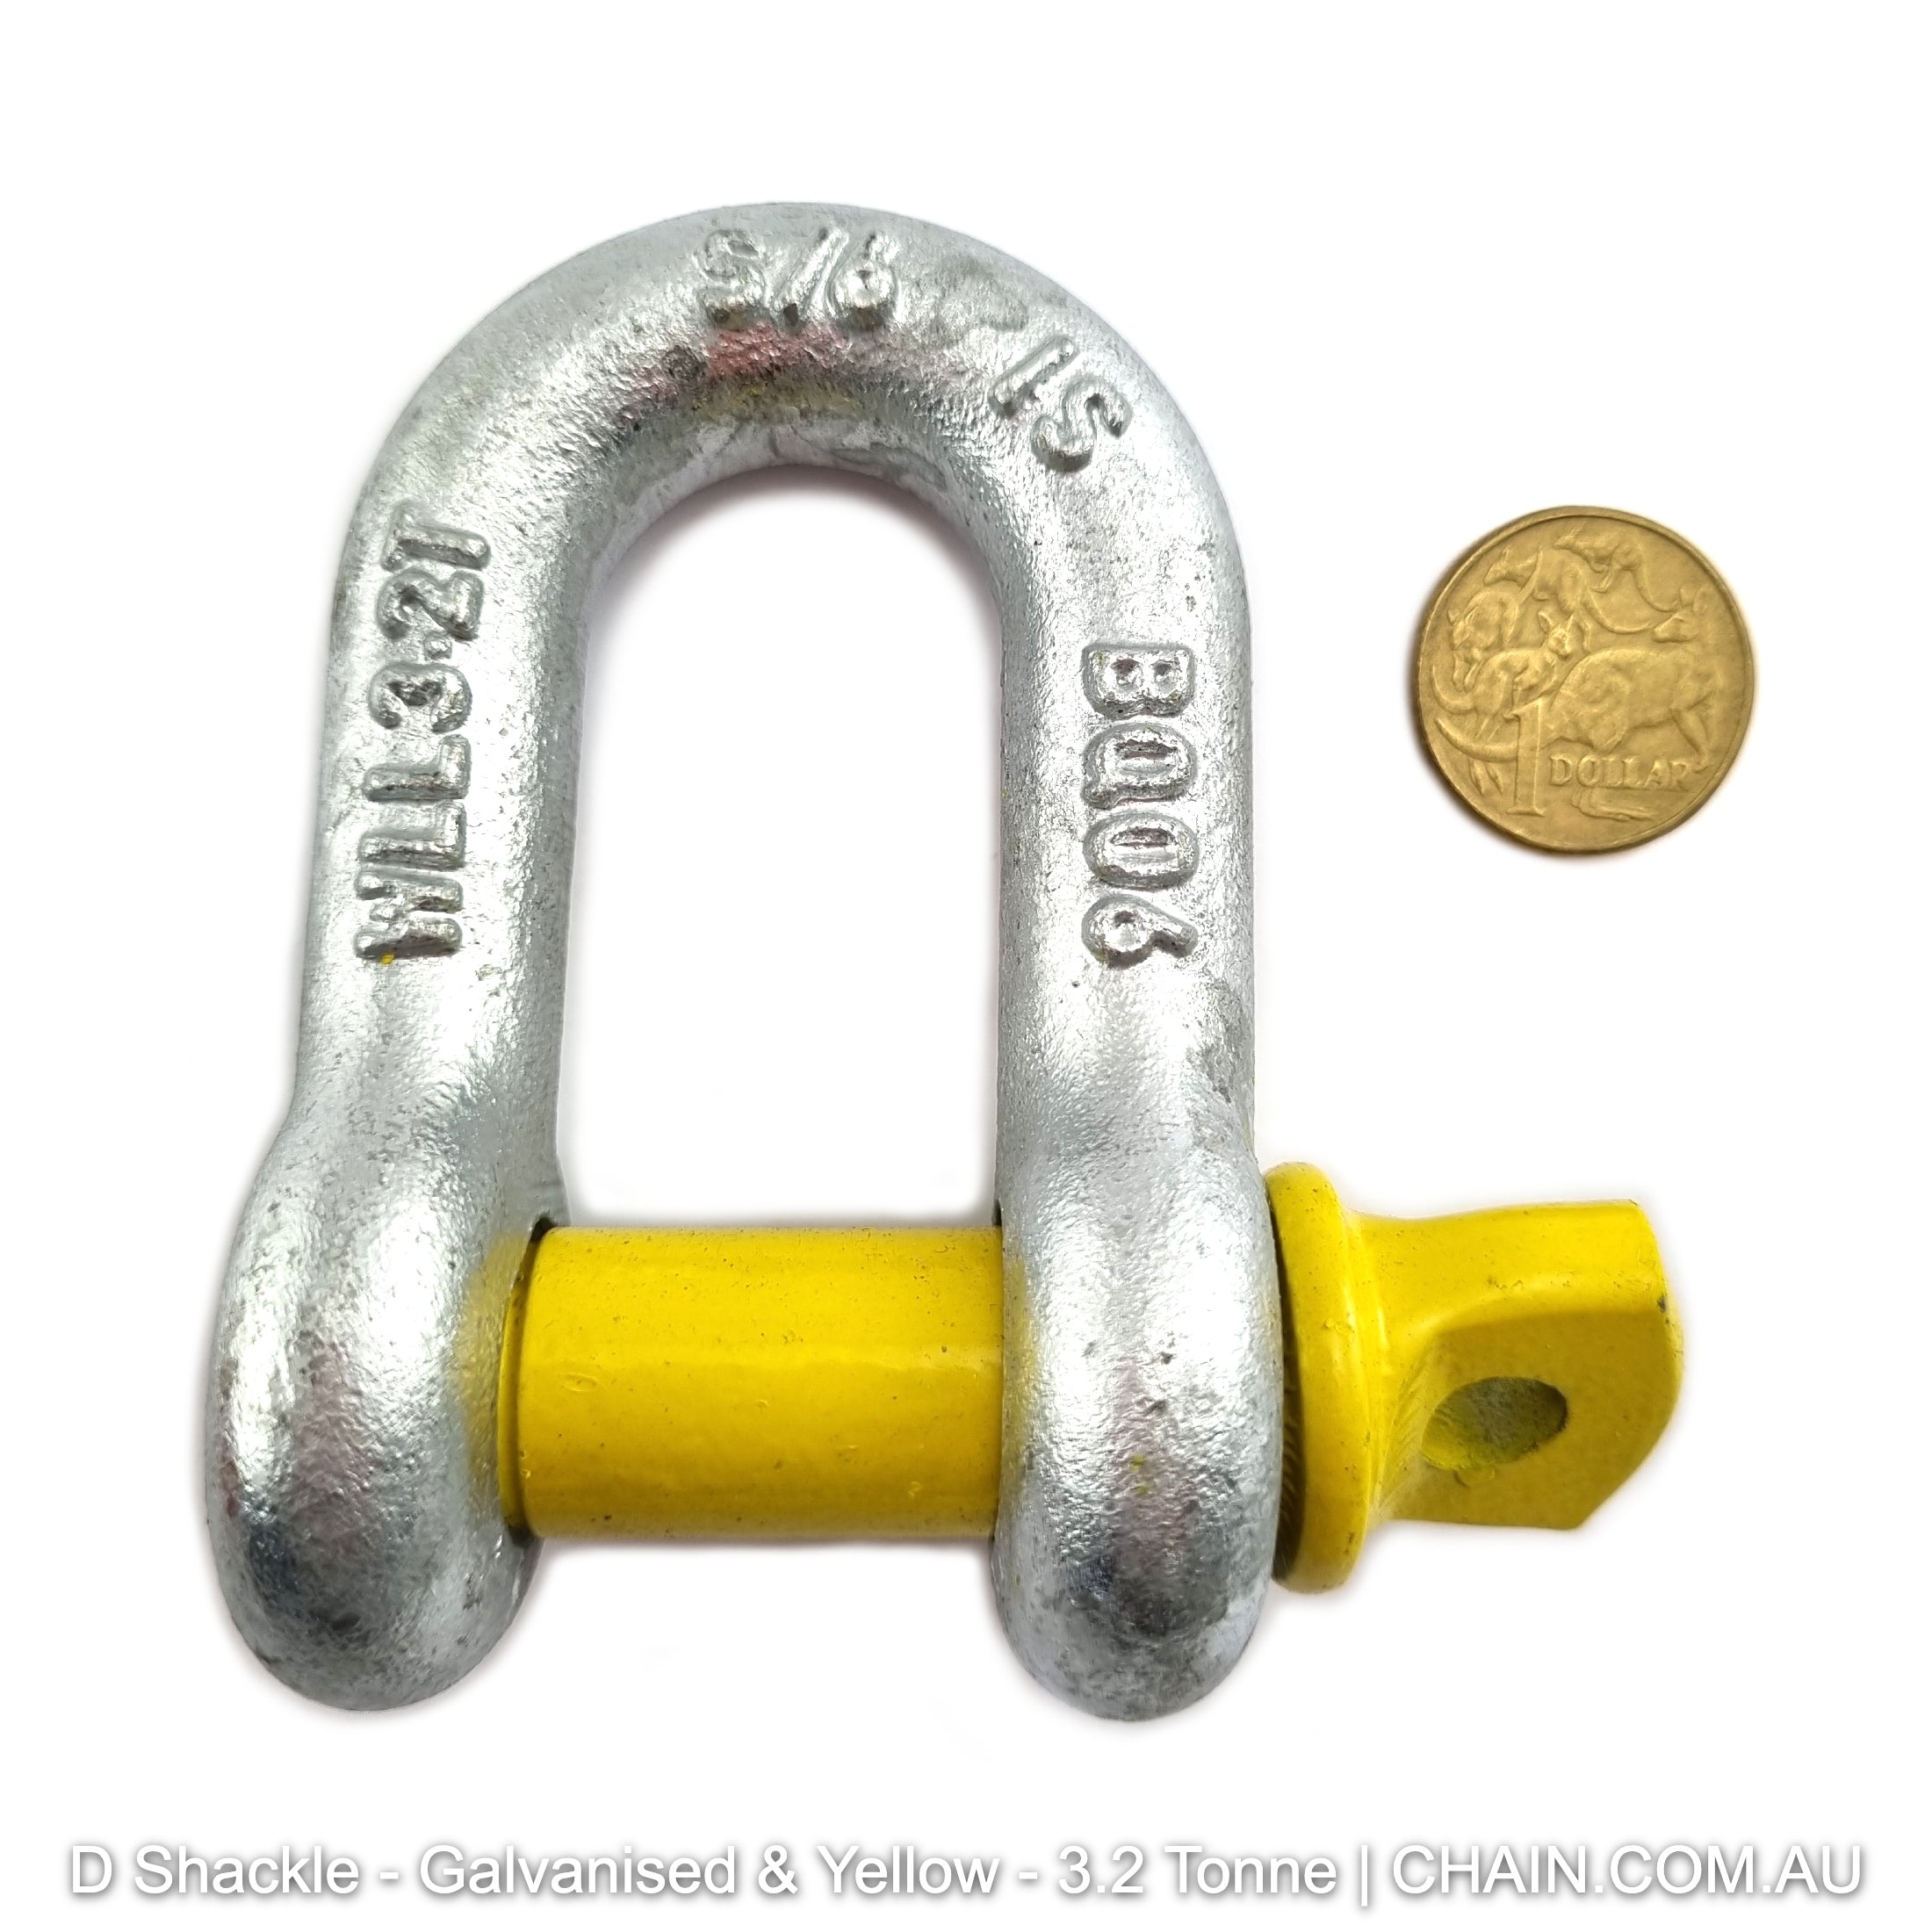 3.2 Tonne Rated (3200kg) Galvanised and yellow D shackles, grade S, rated D shackle. Australia wide shipping. Shop hardware chain.com.au